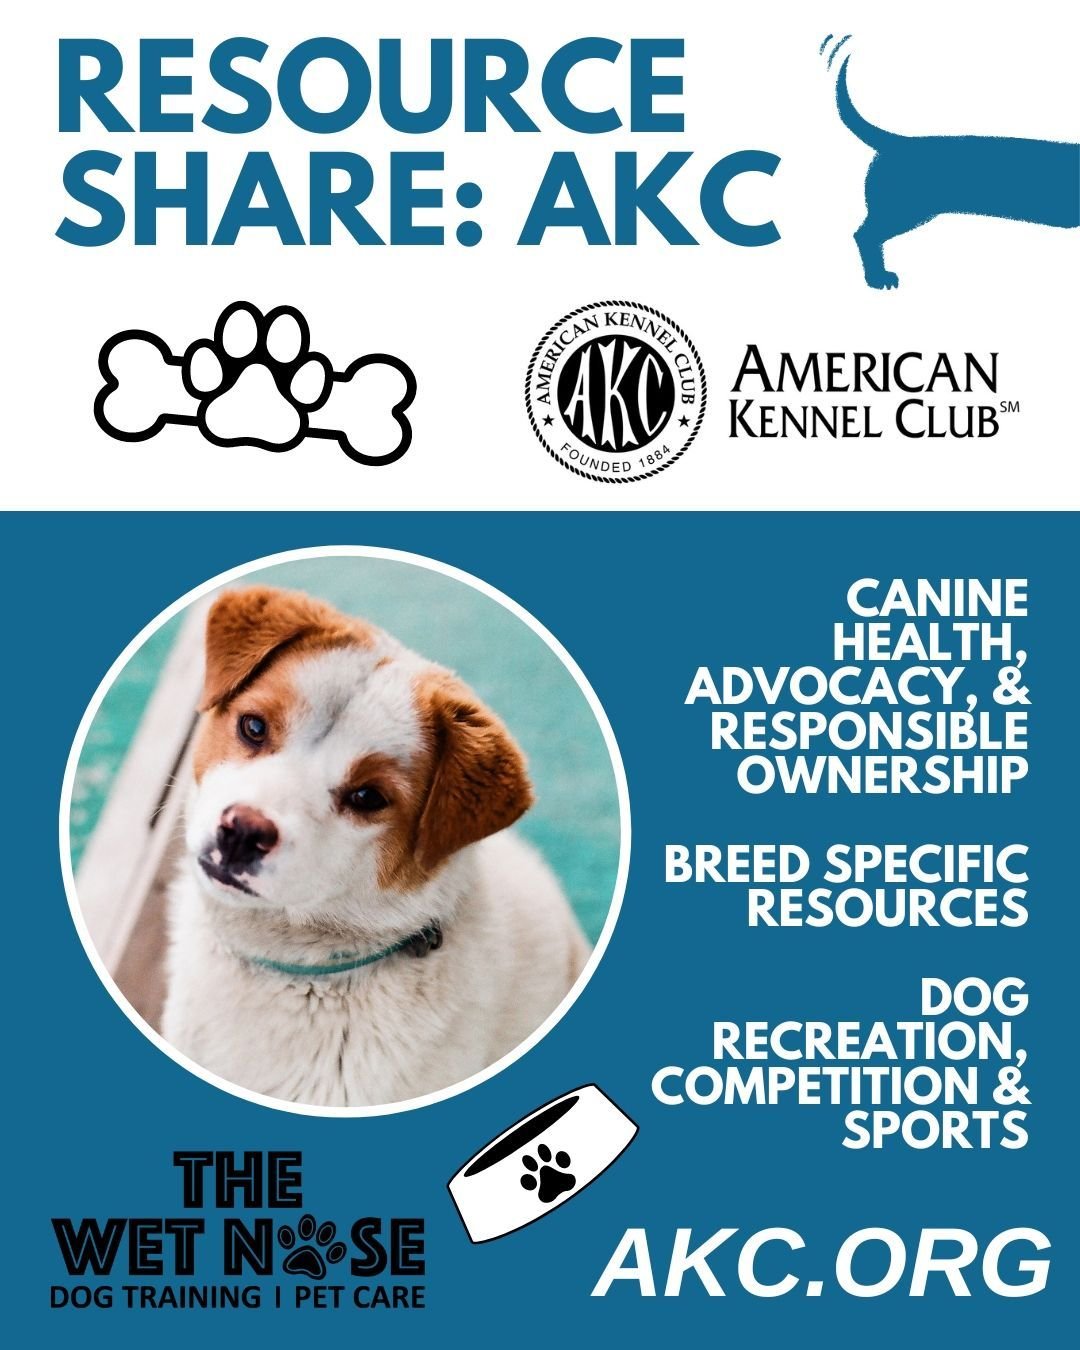 🐾 Discover the Power of the American Kennel Club! (AKC) 🏆

For over 130 years, the AKC has been the ultimate authority for dog lovers, promoting canine health, advocacy, and responsible ownership. With 201 recognized breeds, 5,000+ clubs, and milli